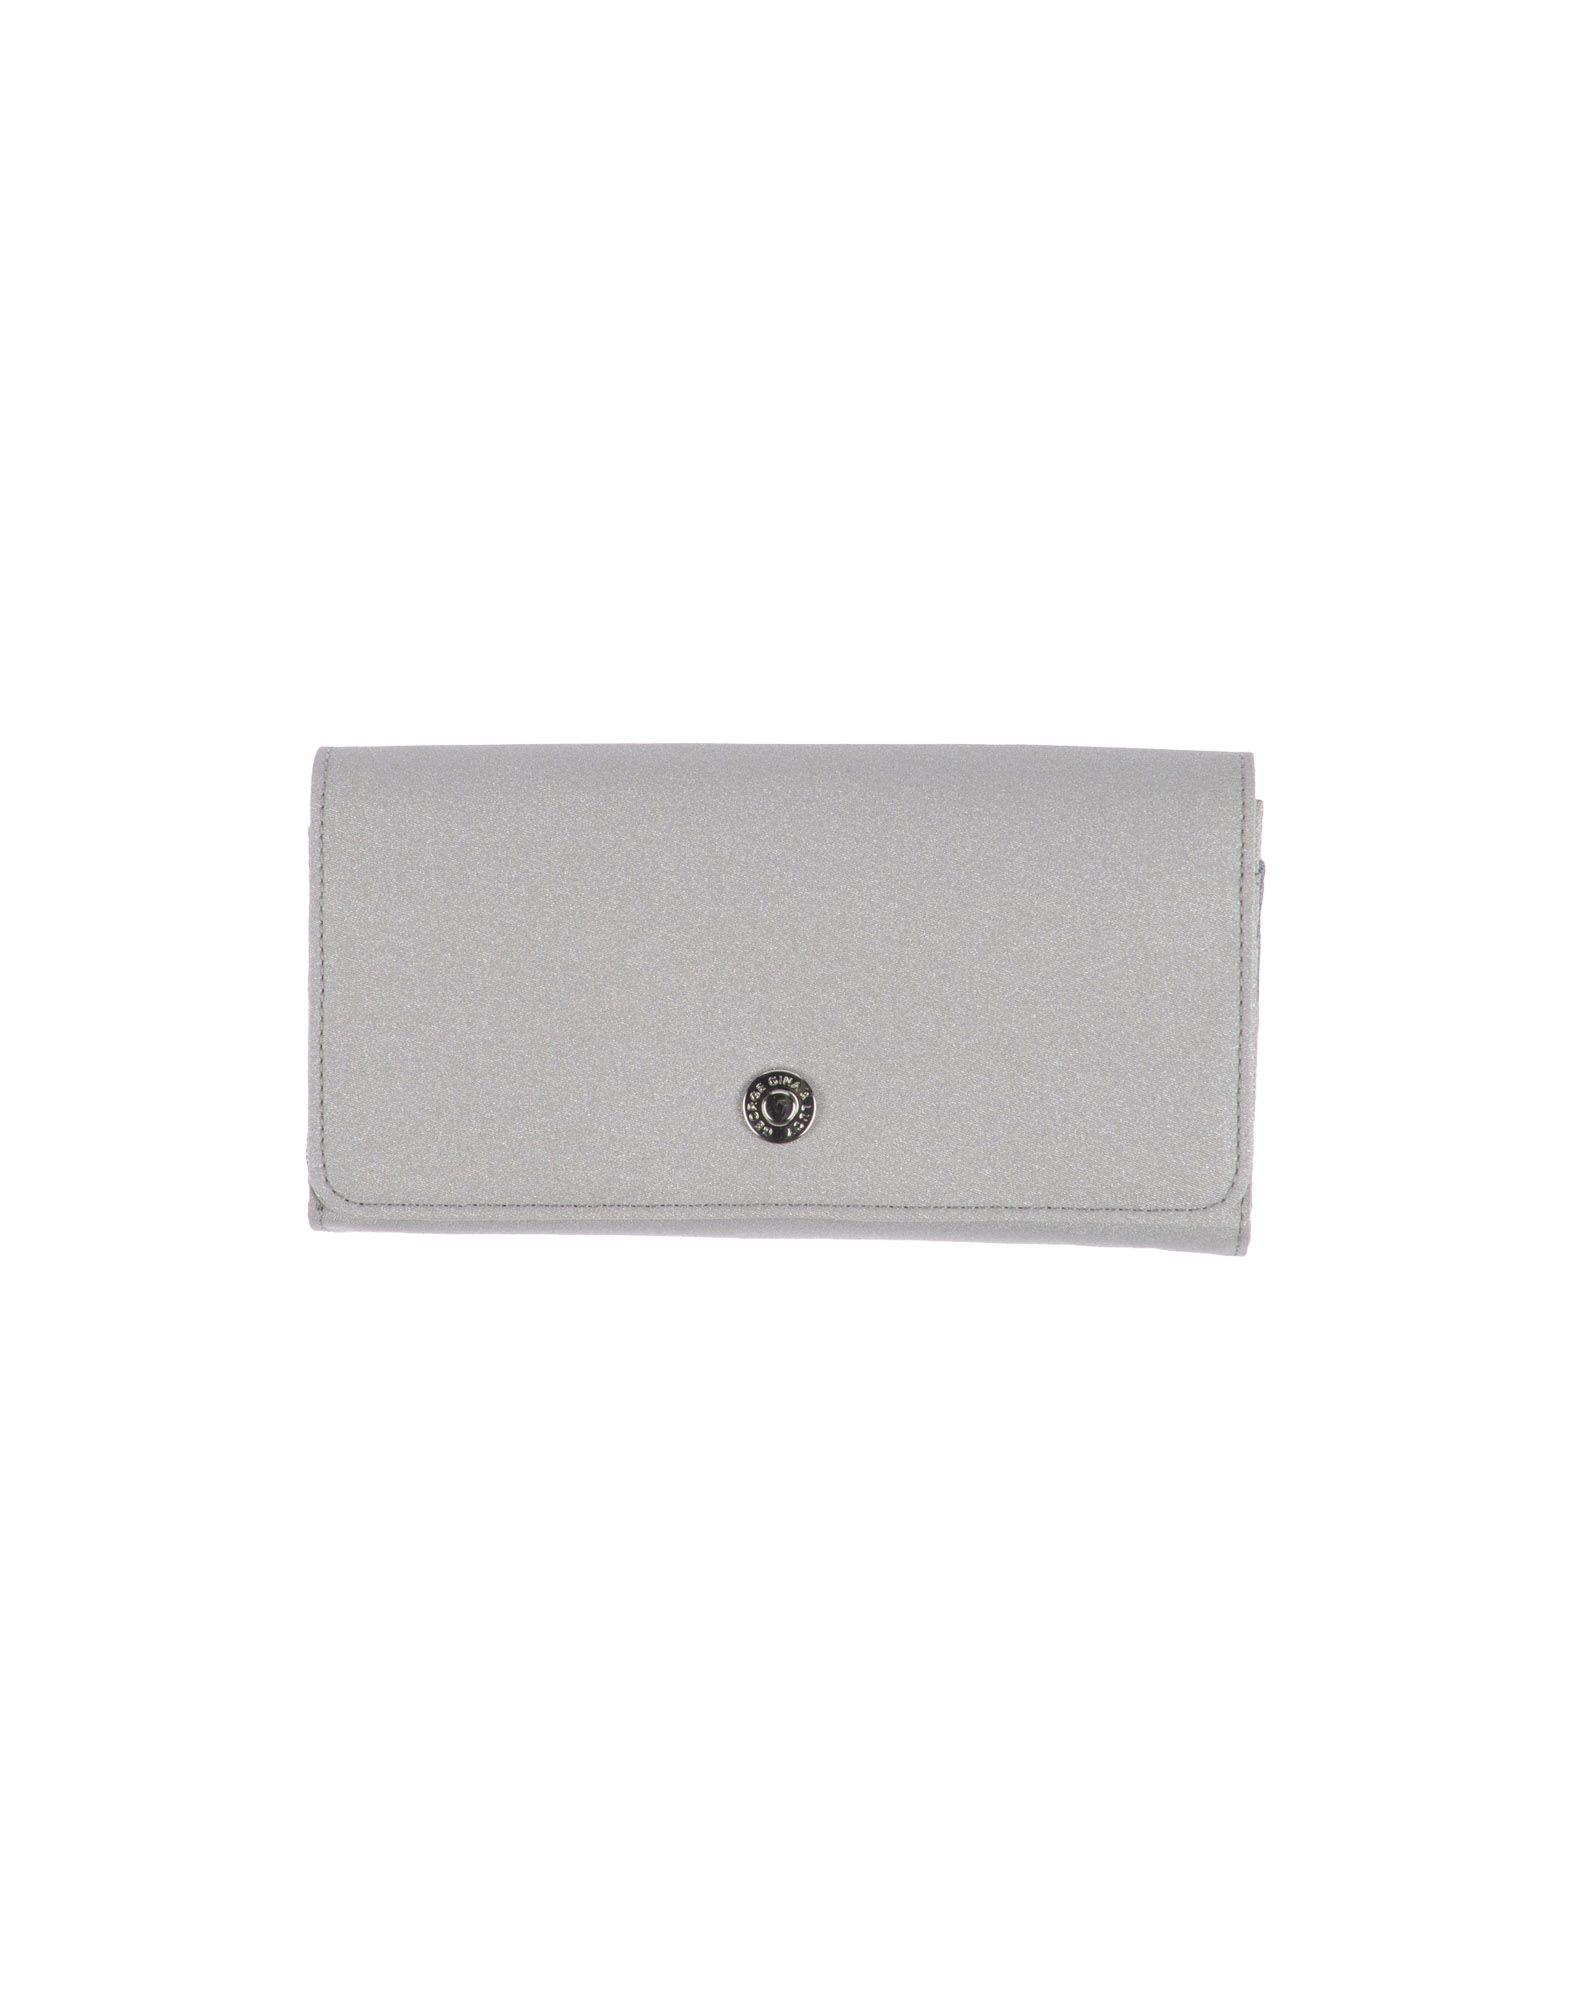 GEORGE GINA & LUCY Wallets